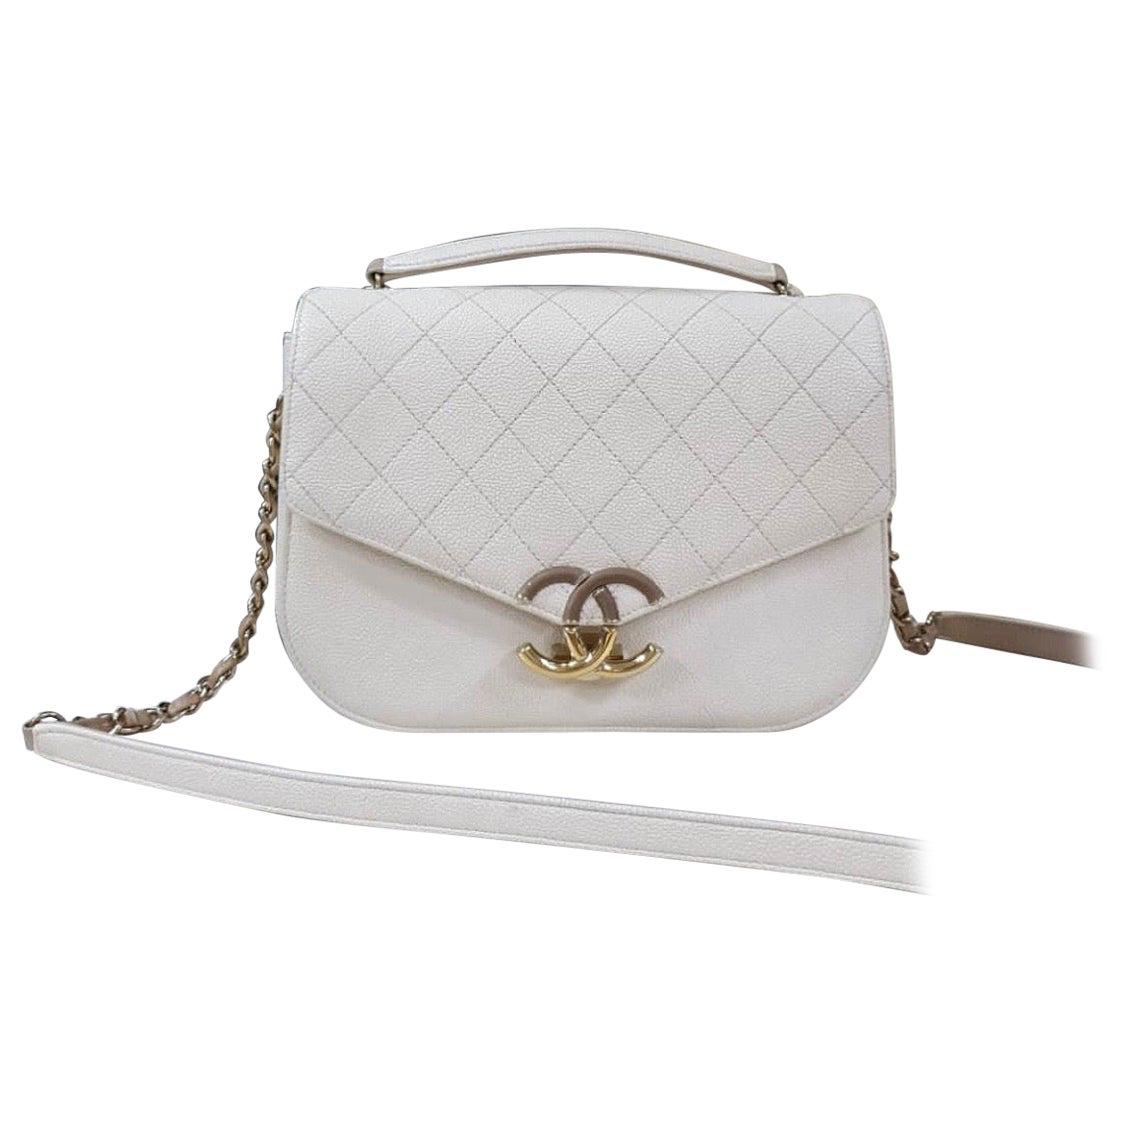 Chanel Grained Flap Bag with Top Handle New 2018 Ivory White Calfskin Tote